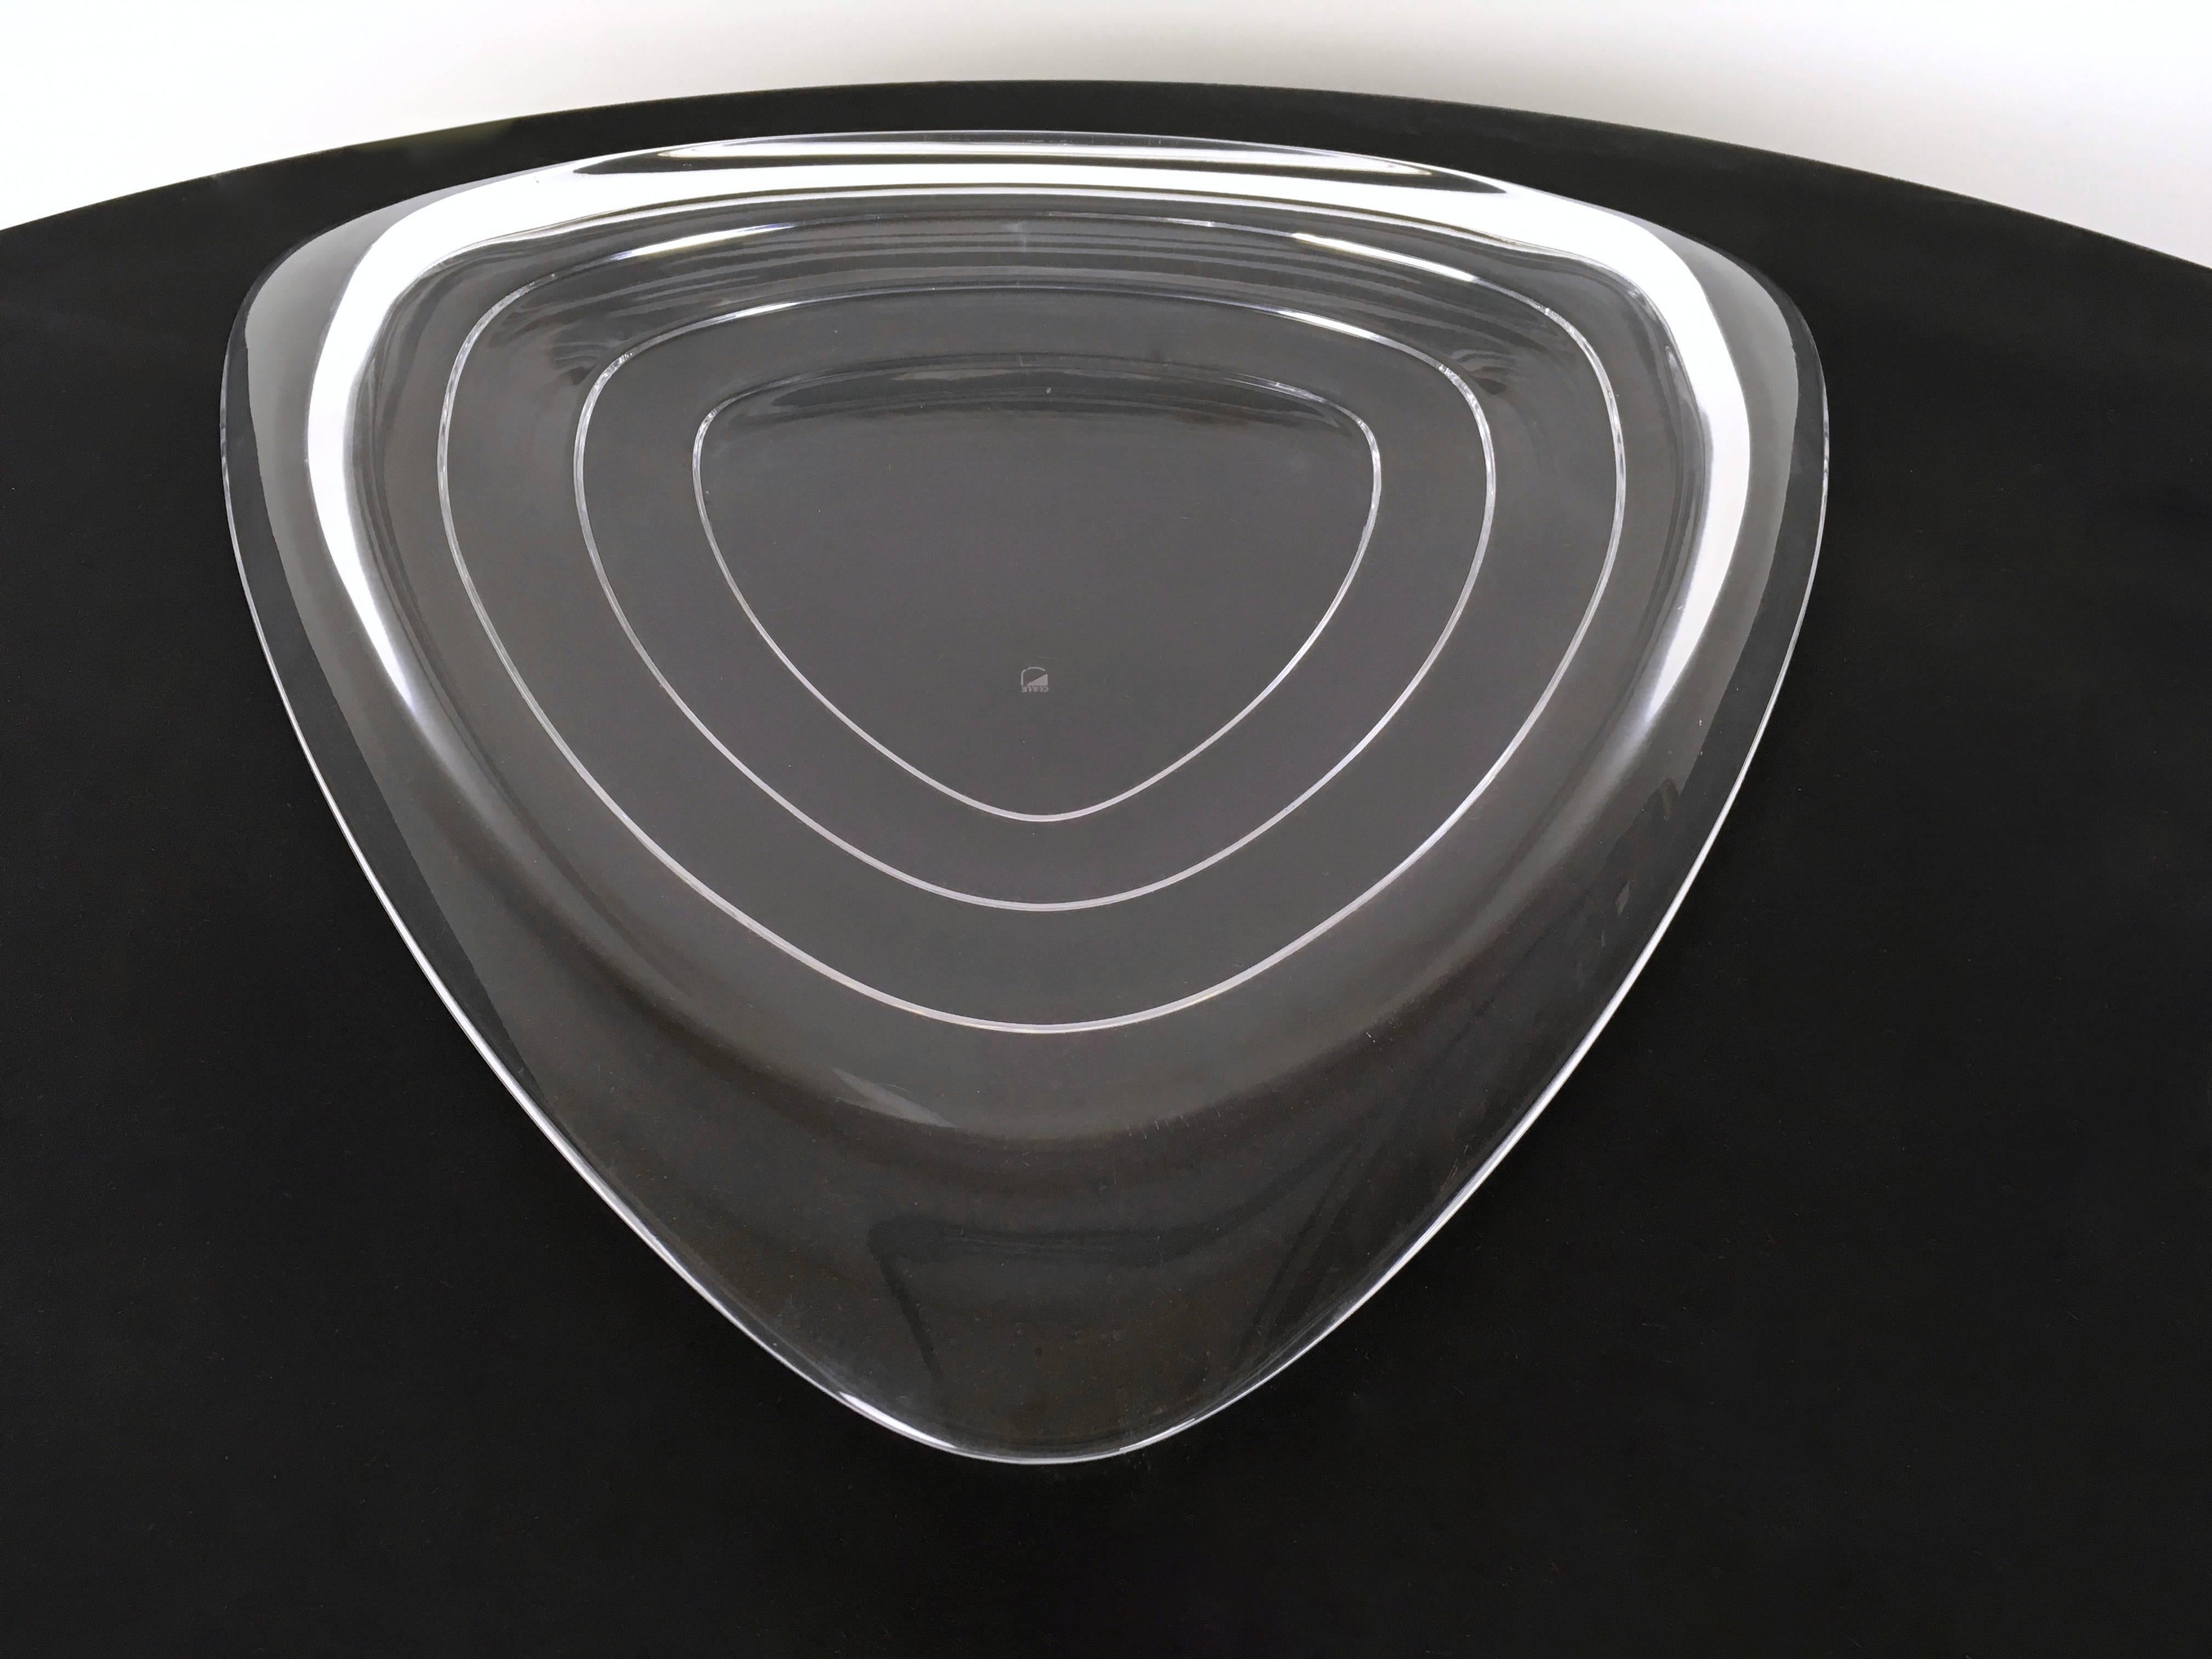 Late 20th Century Modern Triangular Glass Plate by Angelo Mangiarotti for Cristallerie Colle 1990s For Sale